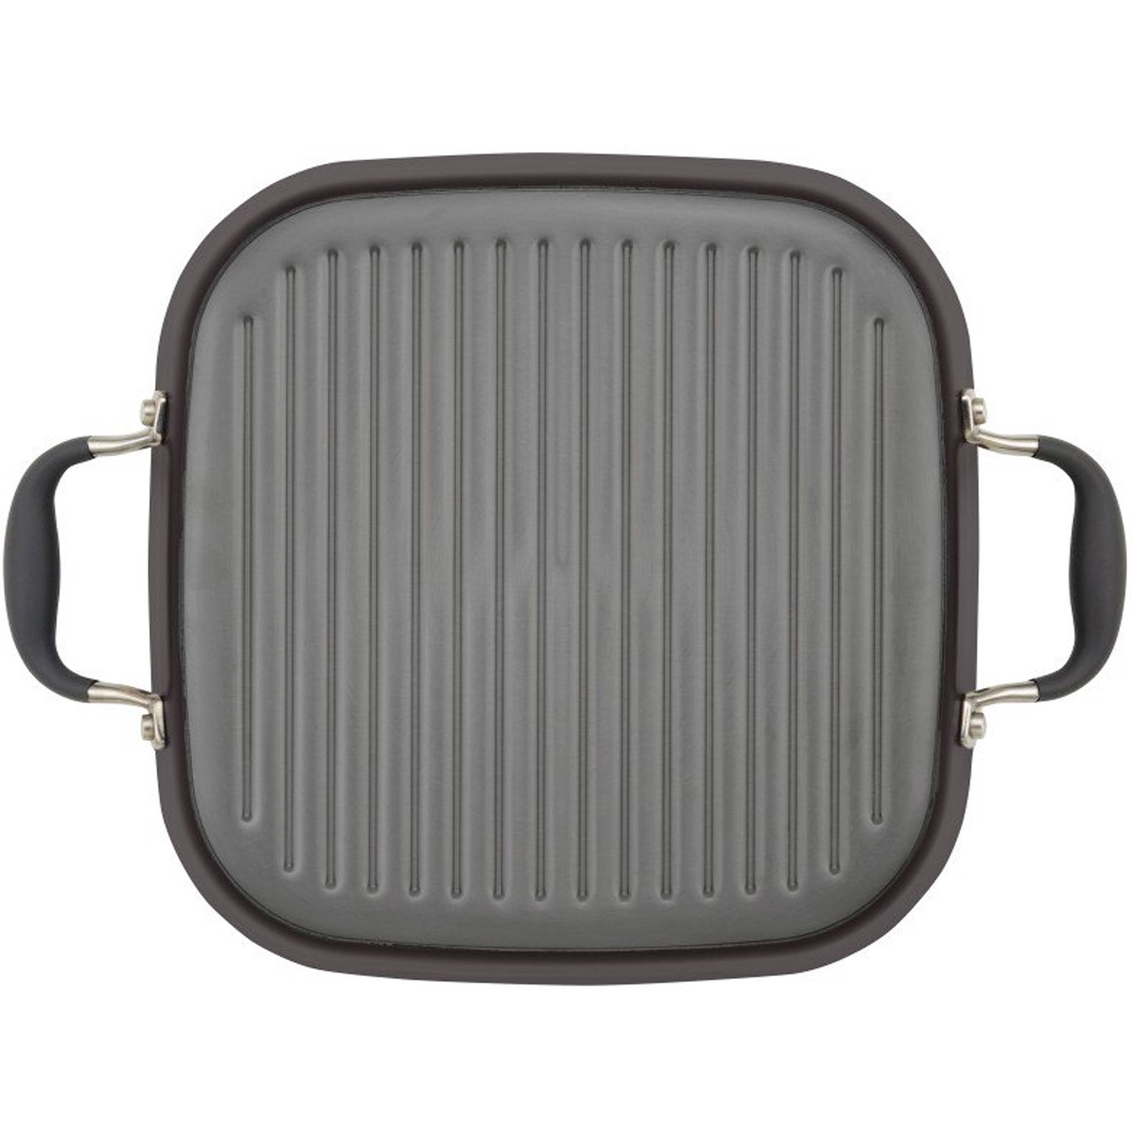 Meyer Anolon Nonstick 2-in-1 Deep Square Grill Pan and Square Roaster Set - Image 4 of 5